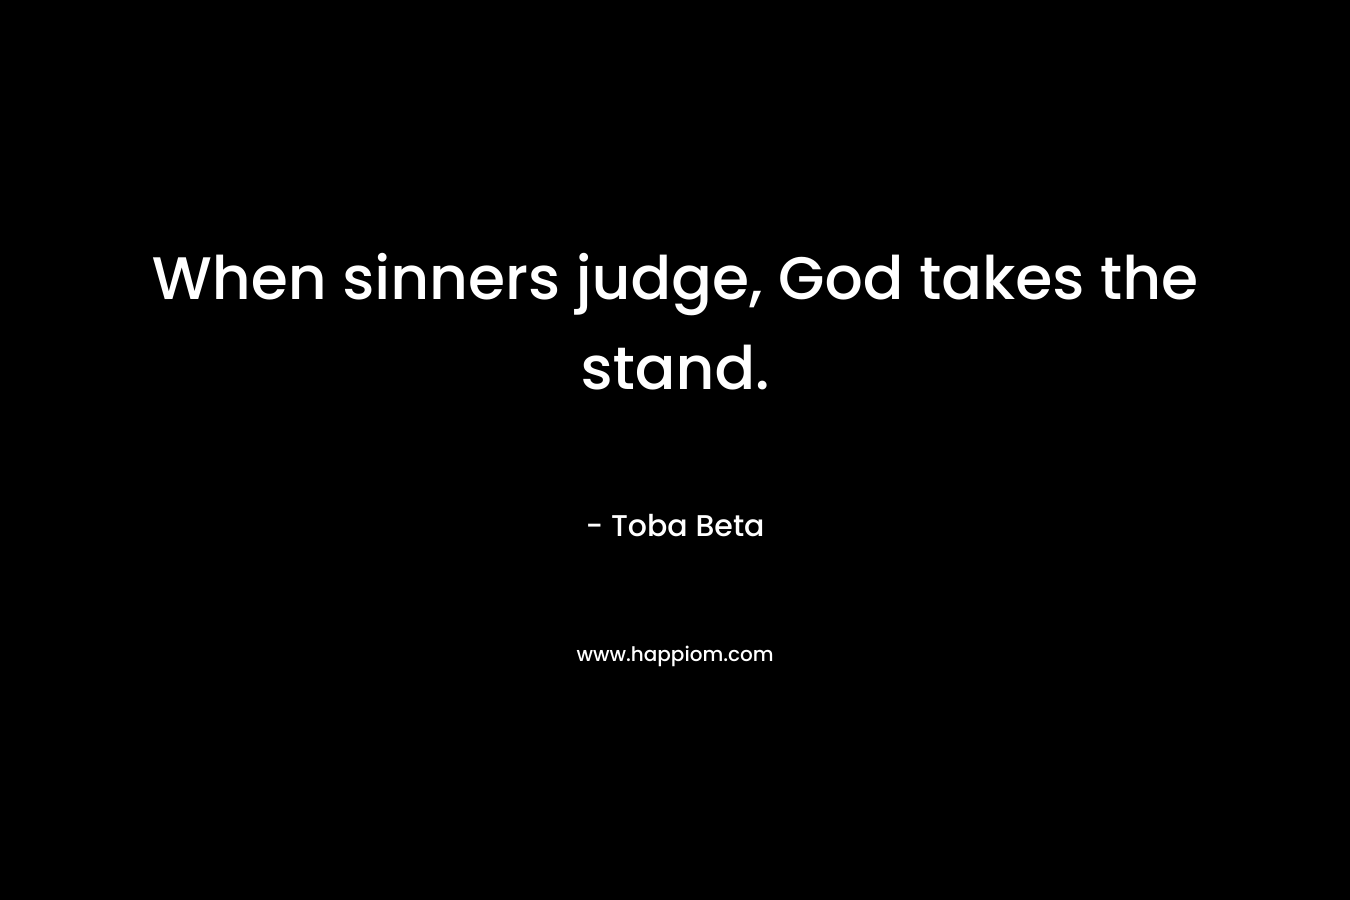 When sinners judge, God takes the stand. – Toba Beta